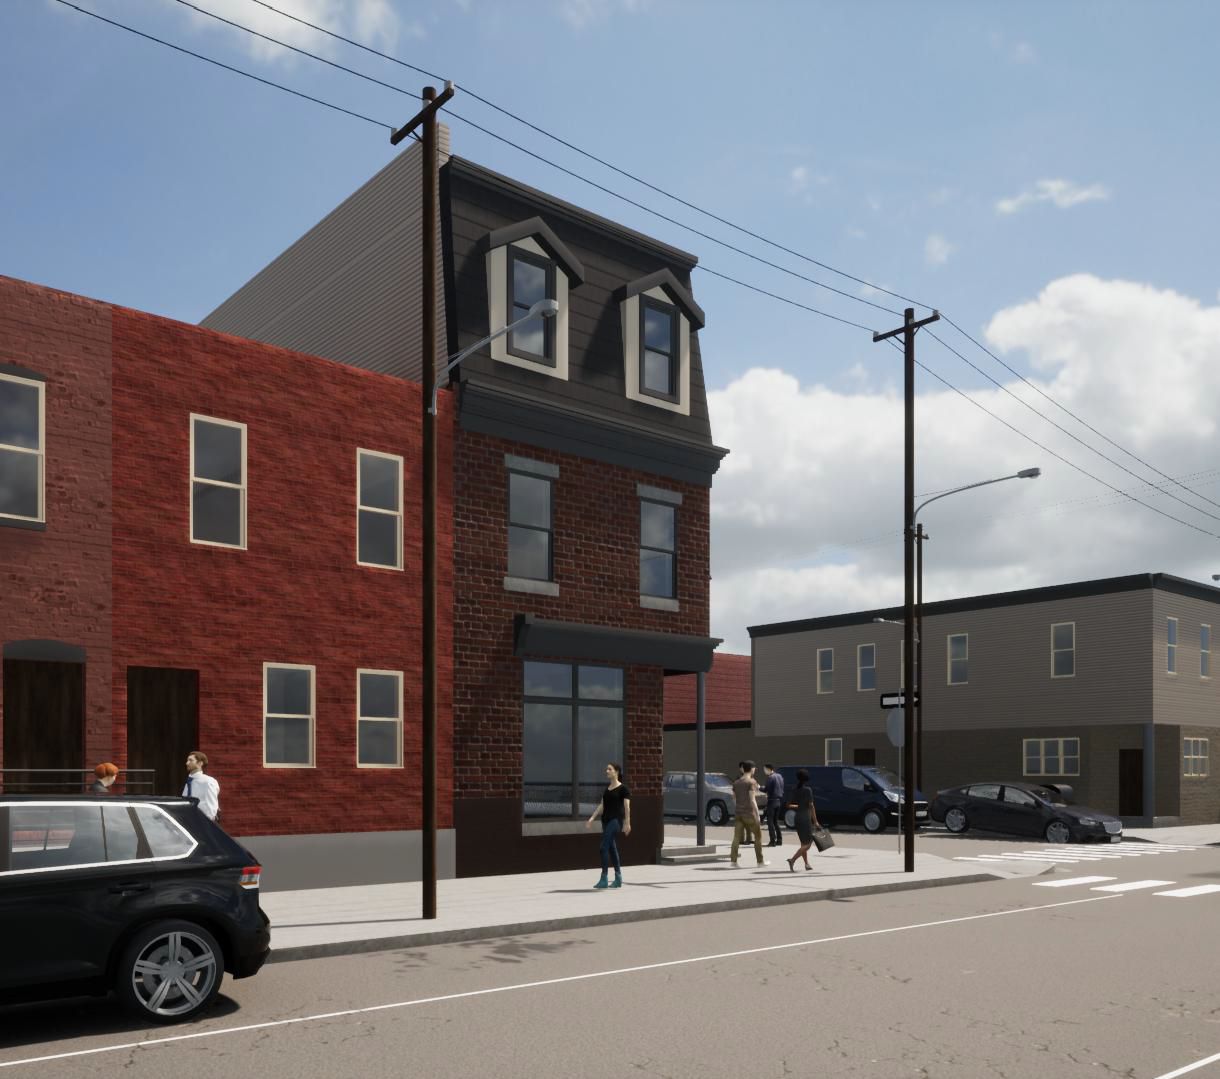 1939 South 5th Street. Building rendering. Credit: Toner Architects via the City of Philadelphia